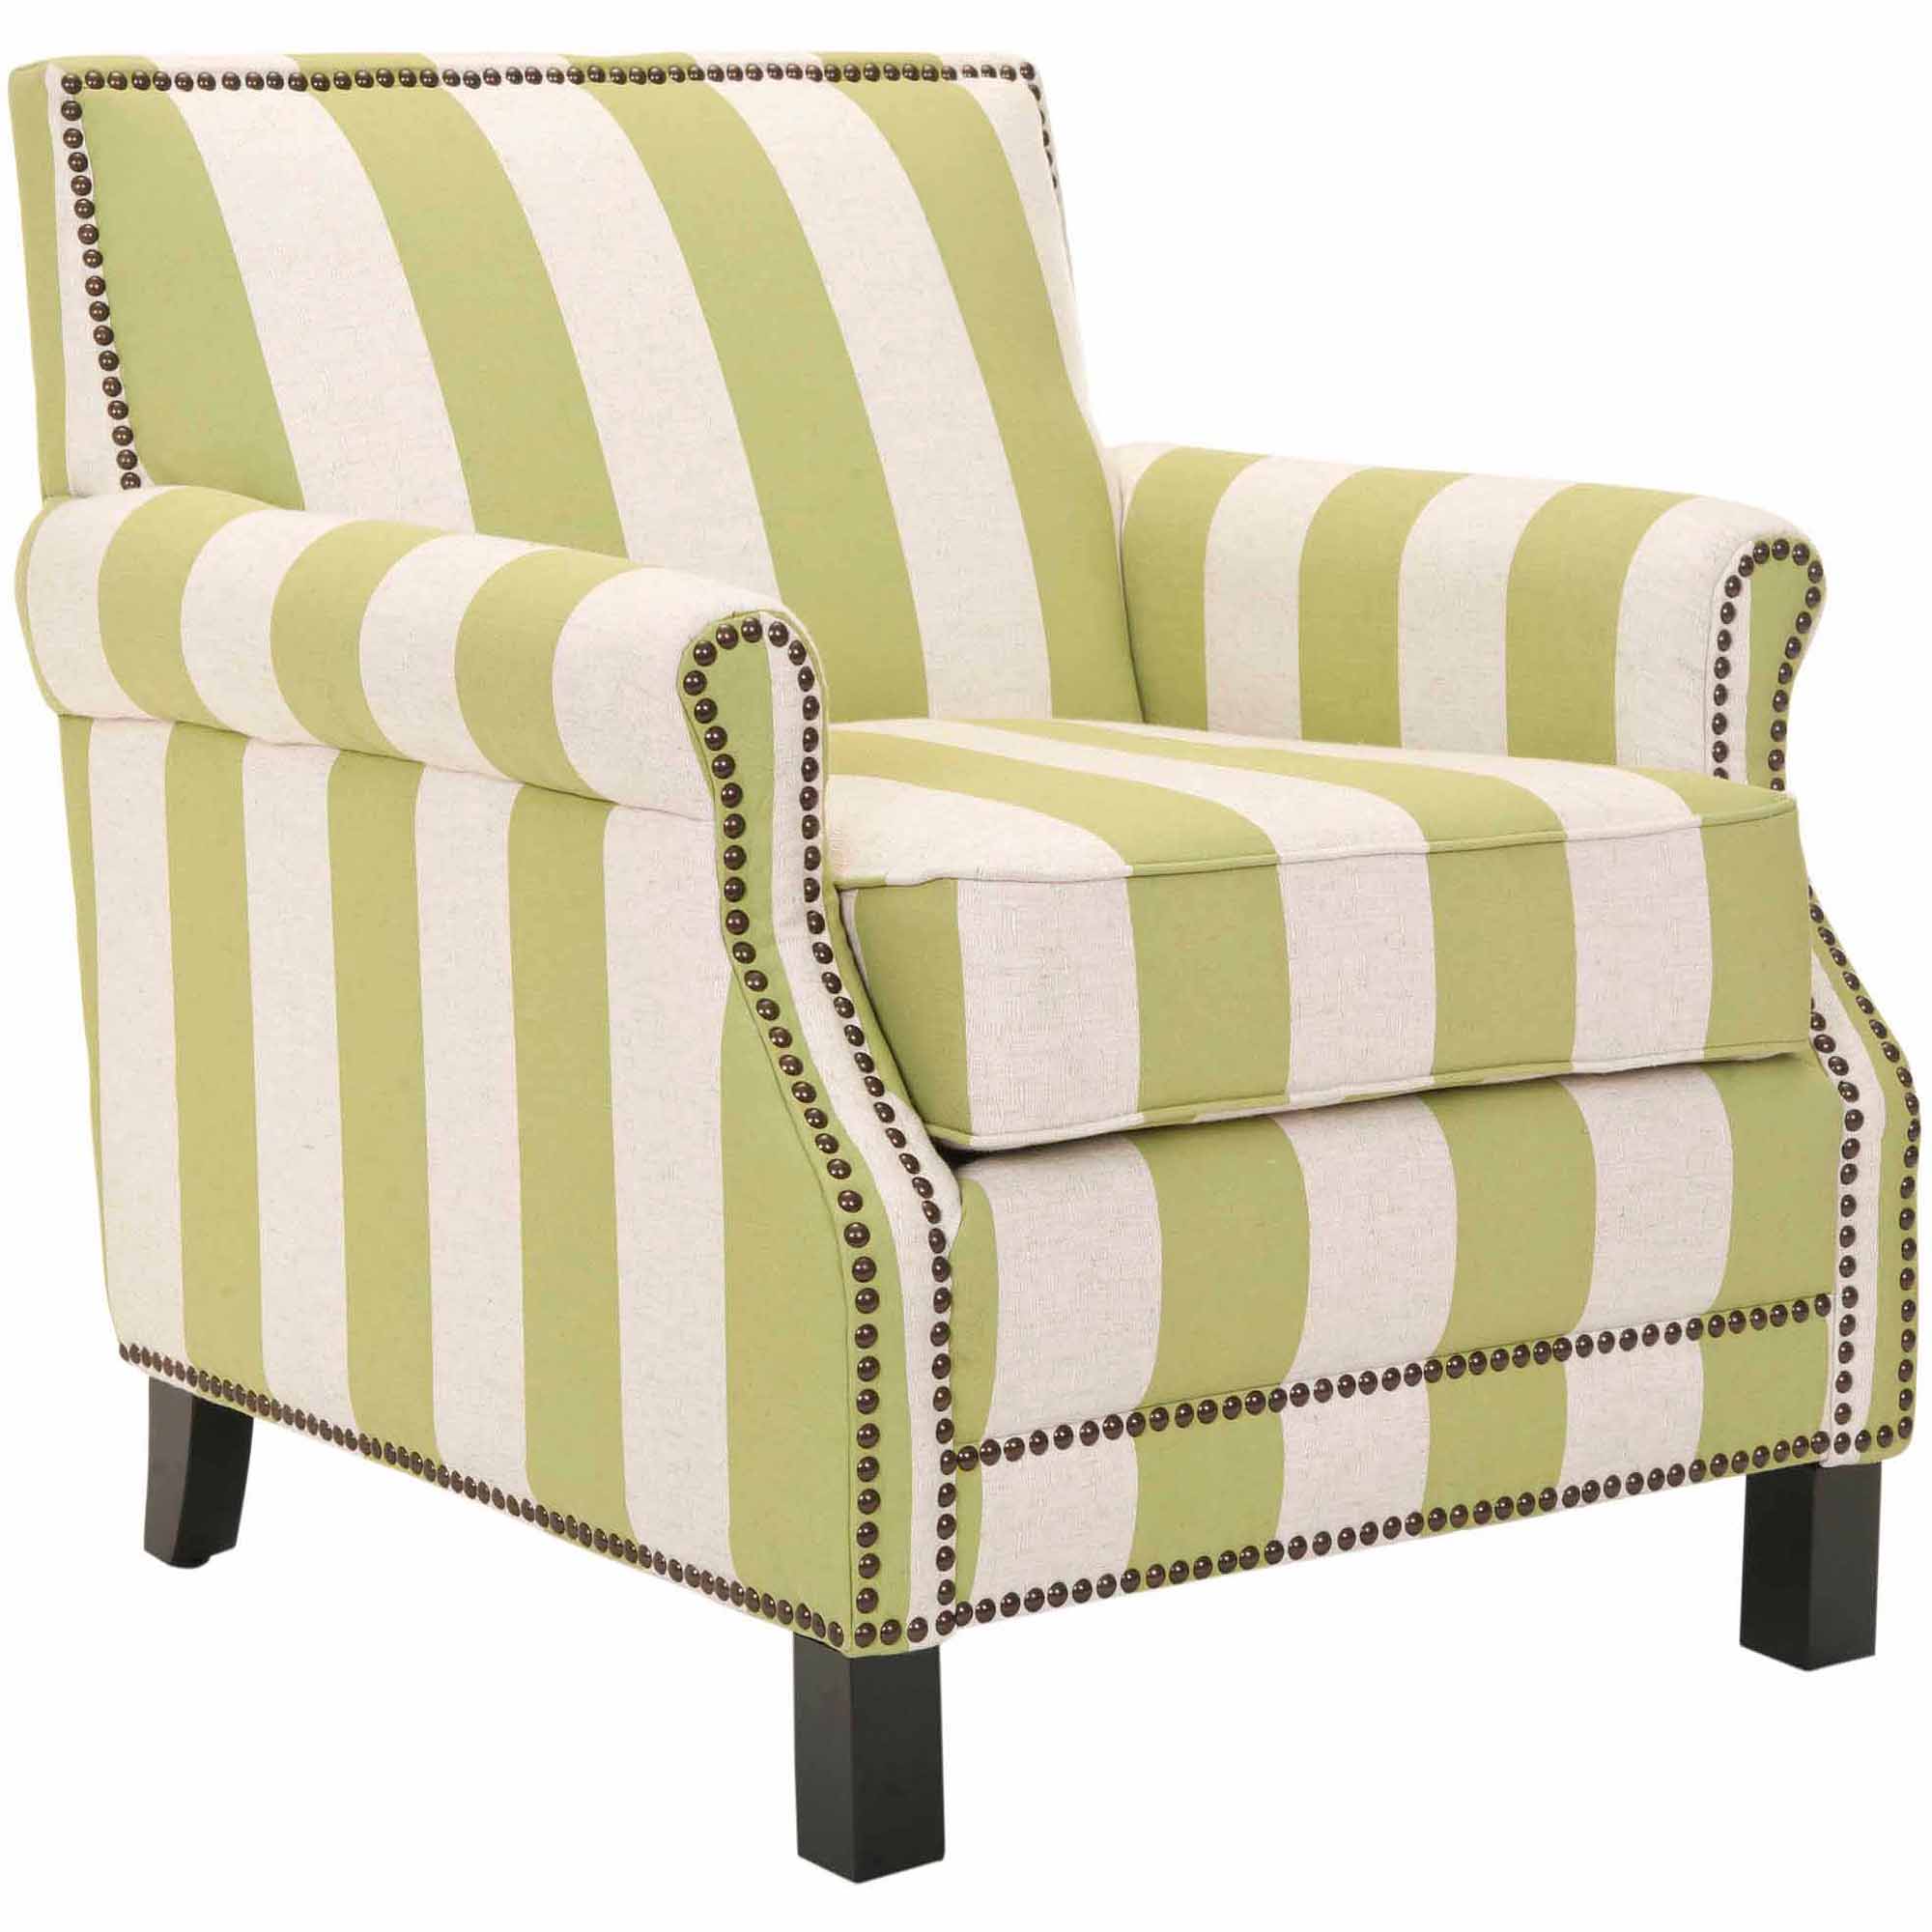 SAFAVIEH Easton Rustic Glam Upholstered Club Chair w/ Nailheads, Lime Green/White - image 3 of 4